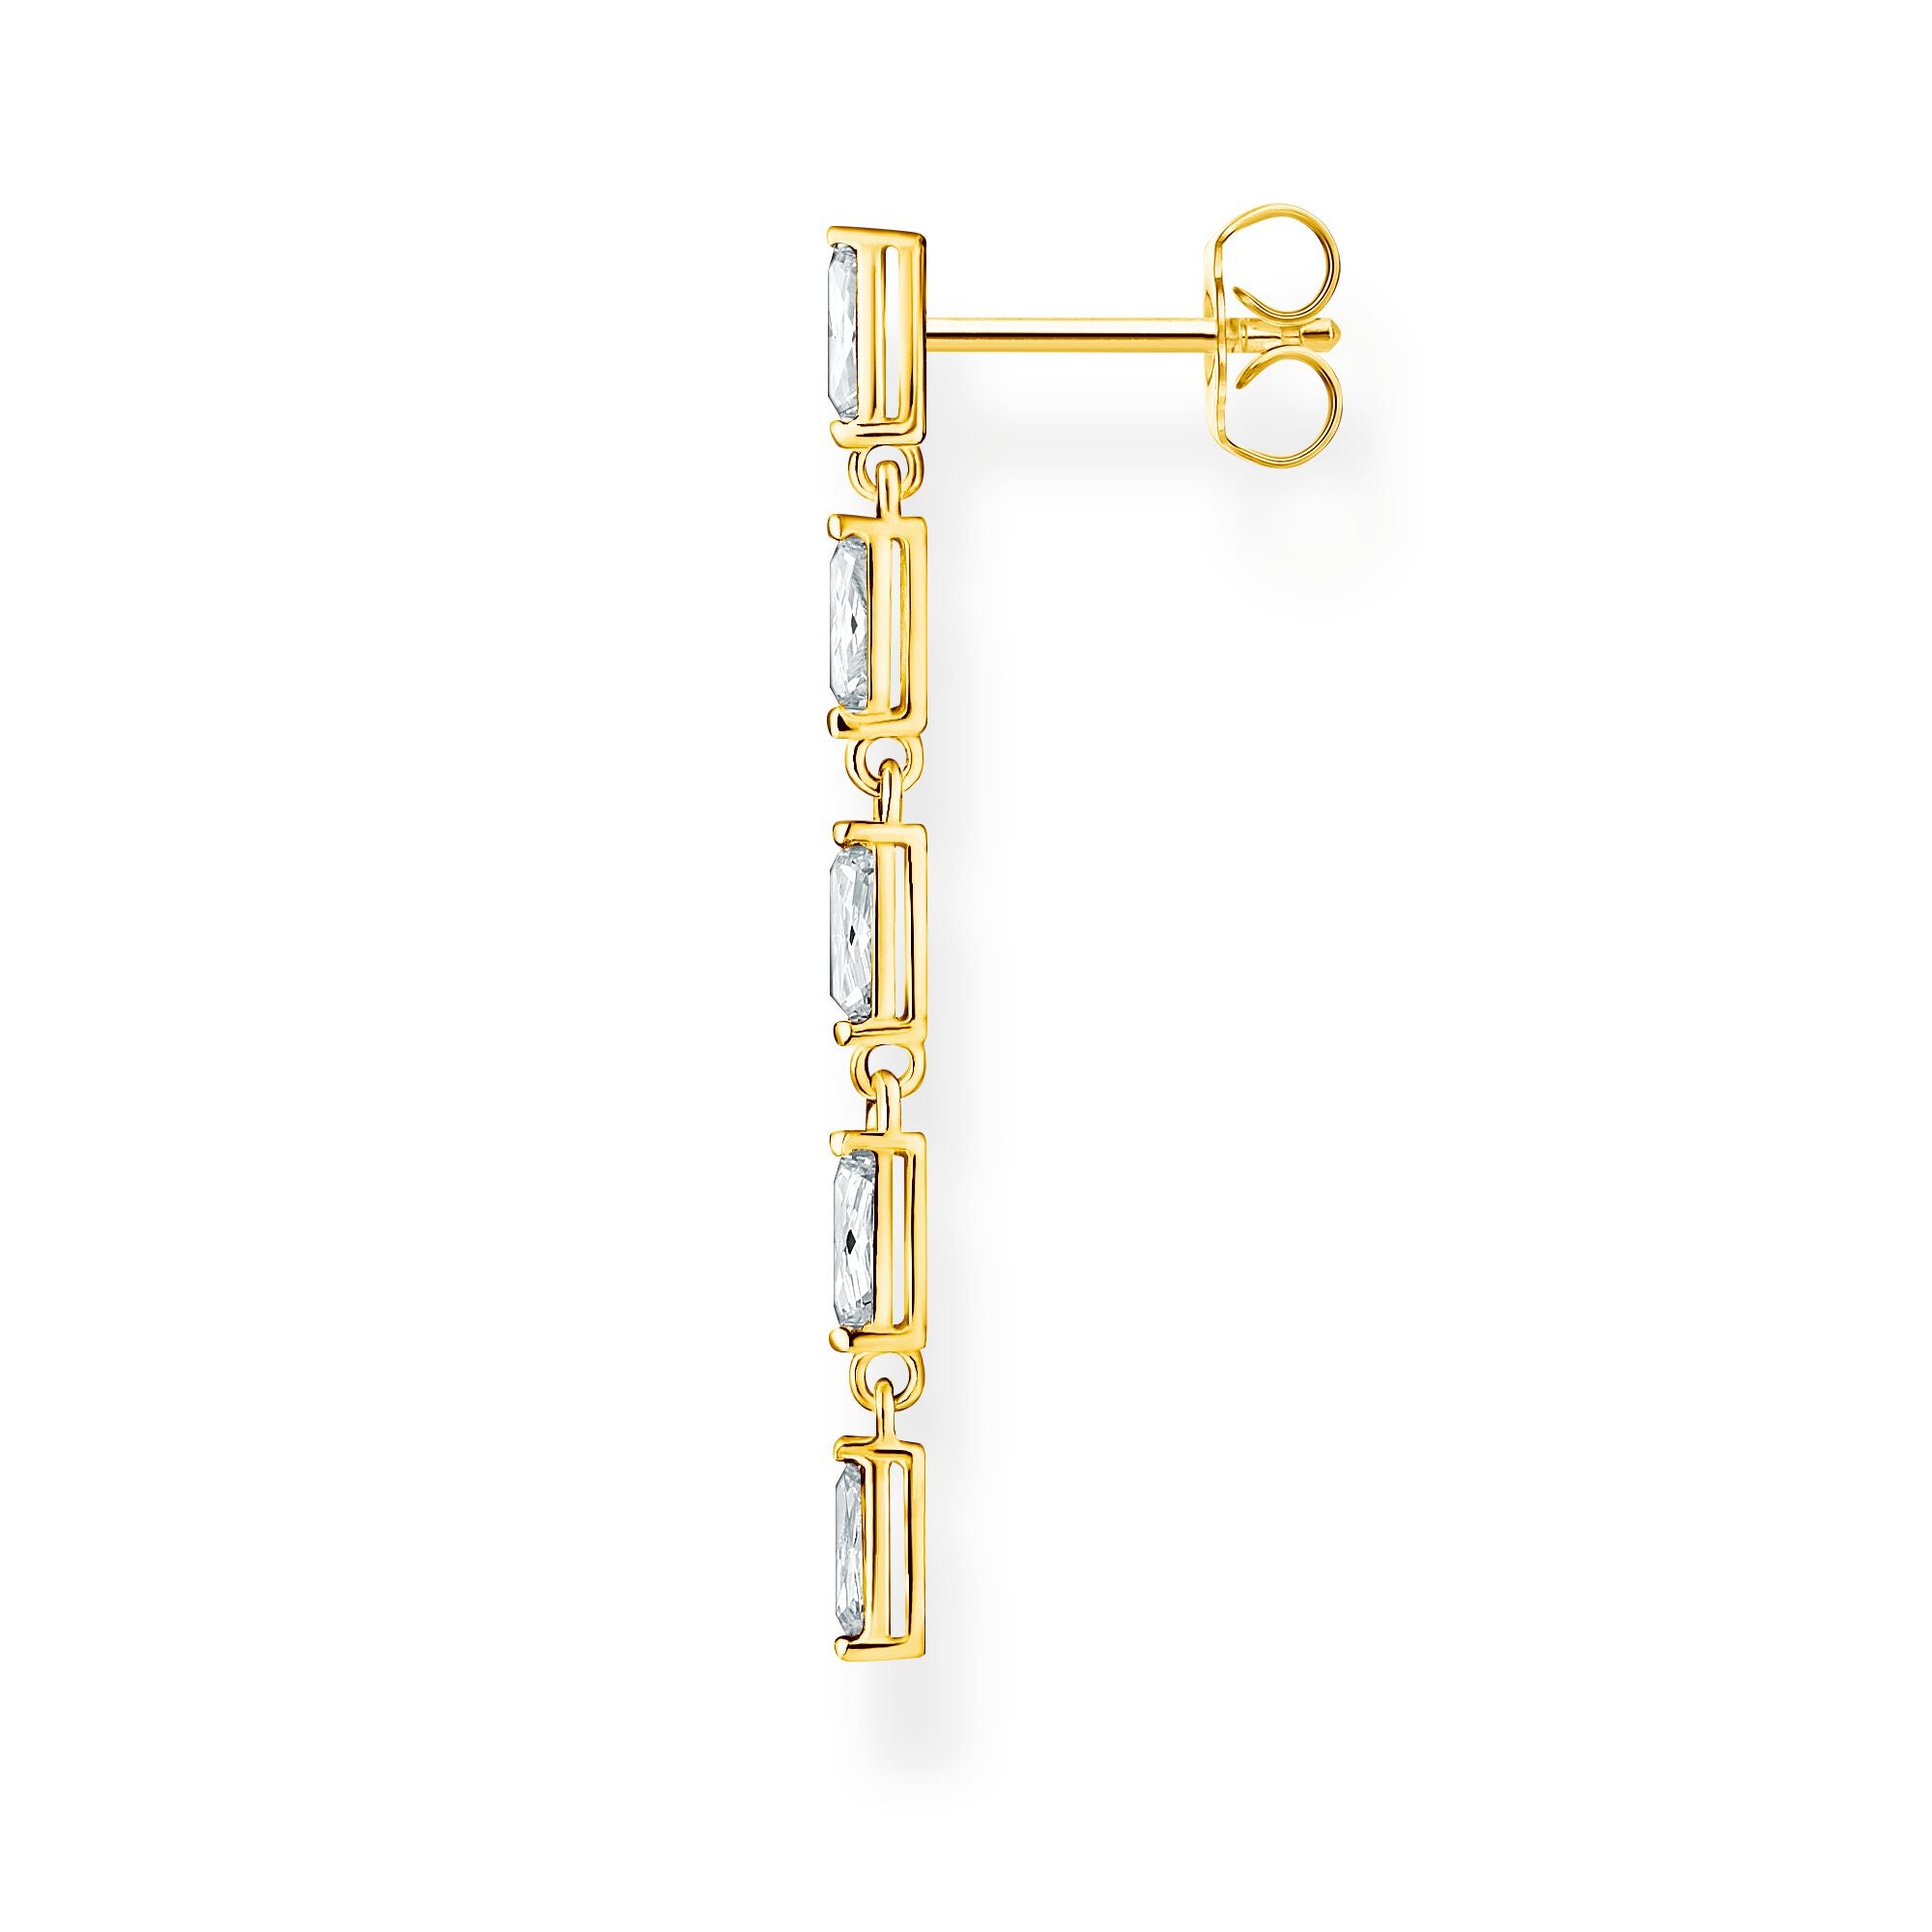 Thomas Sabo 18k yellow gold plated sterling silver, 5 white baguette cz dangle, single stud earring